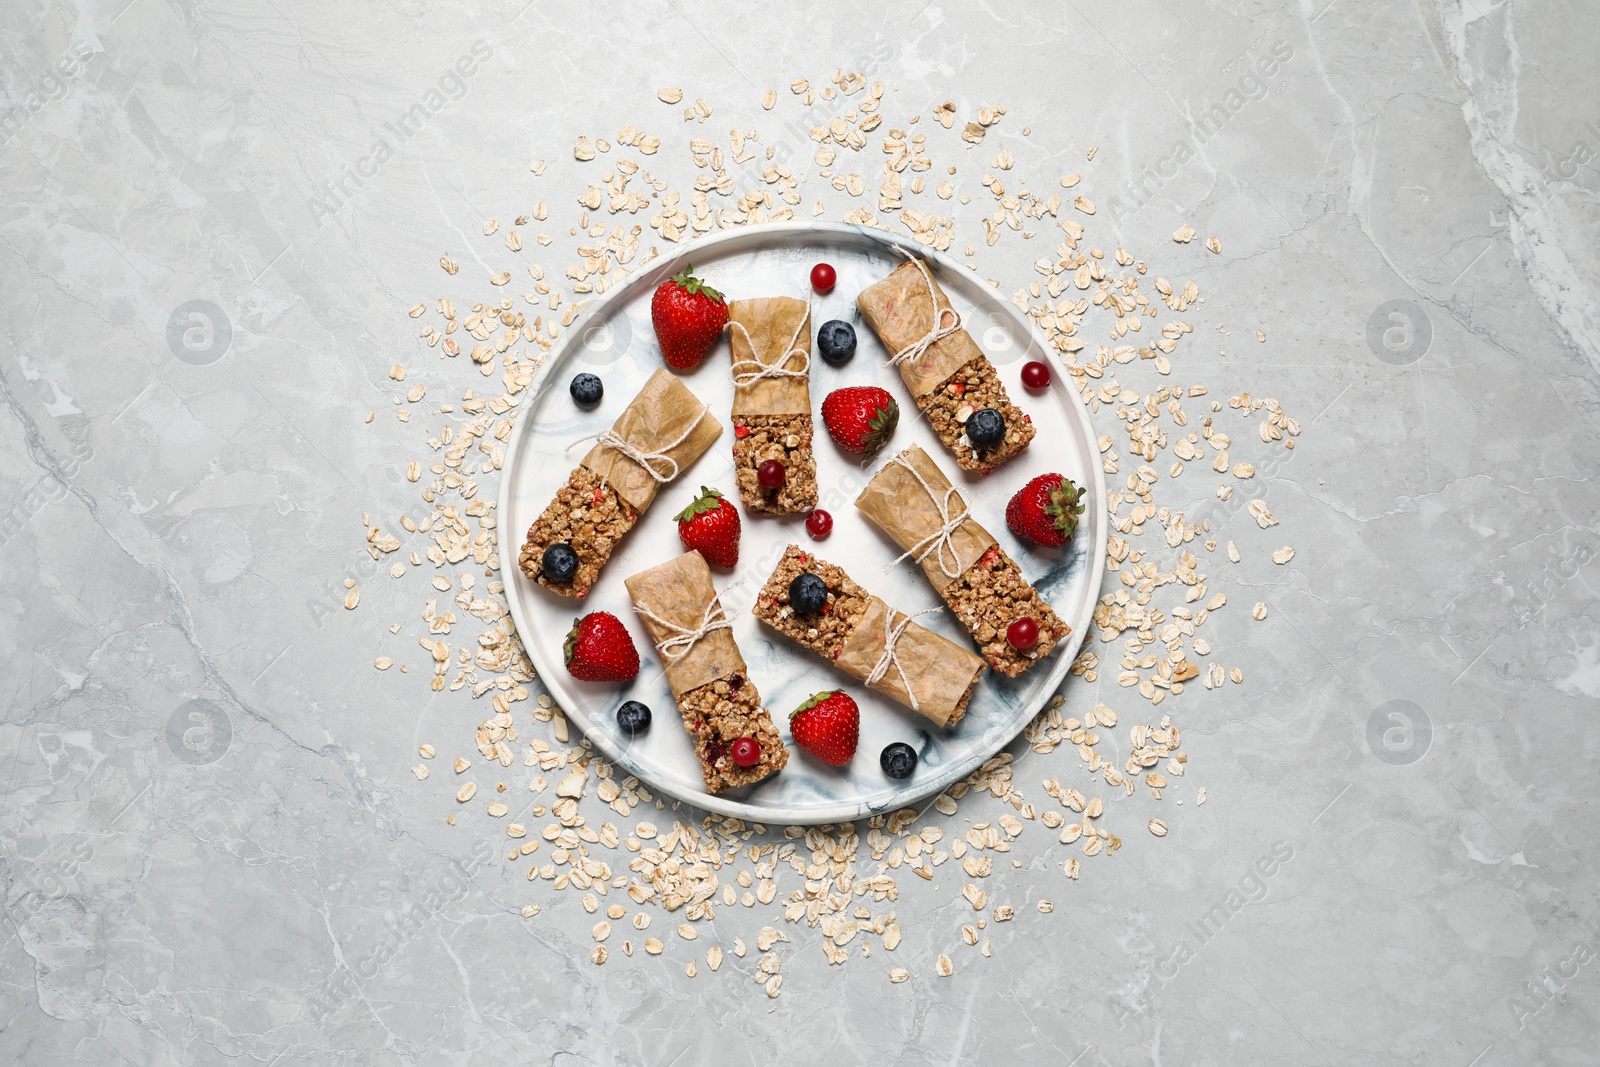 Photo of Tasty granola bars and ingredients on light grey table, top view